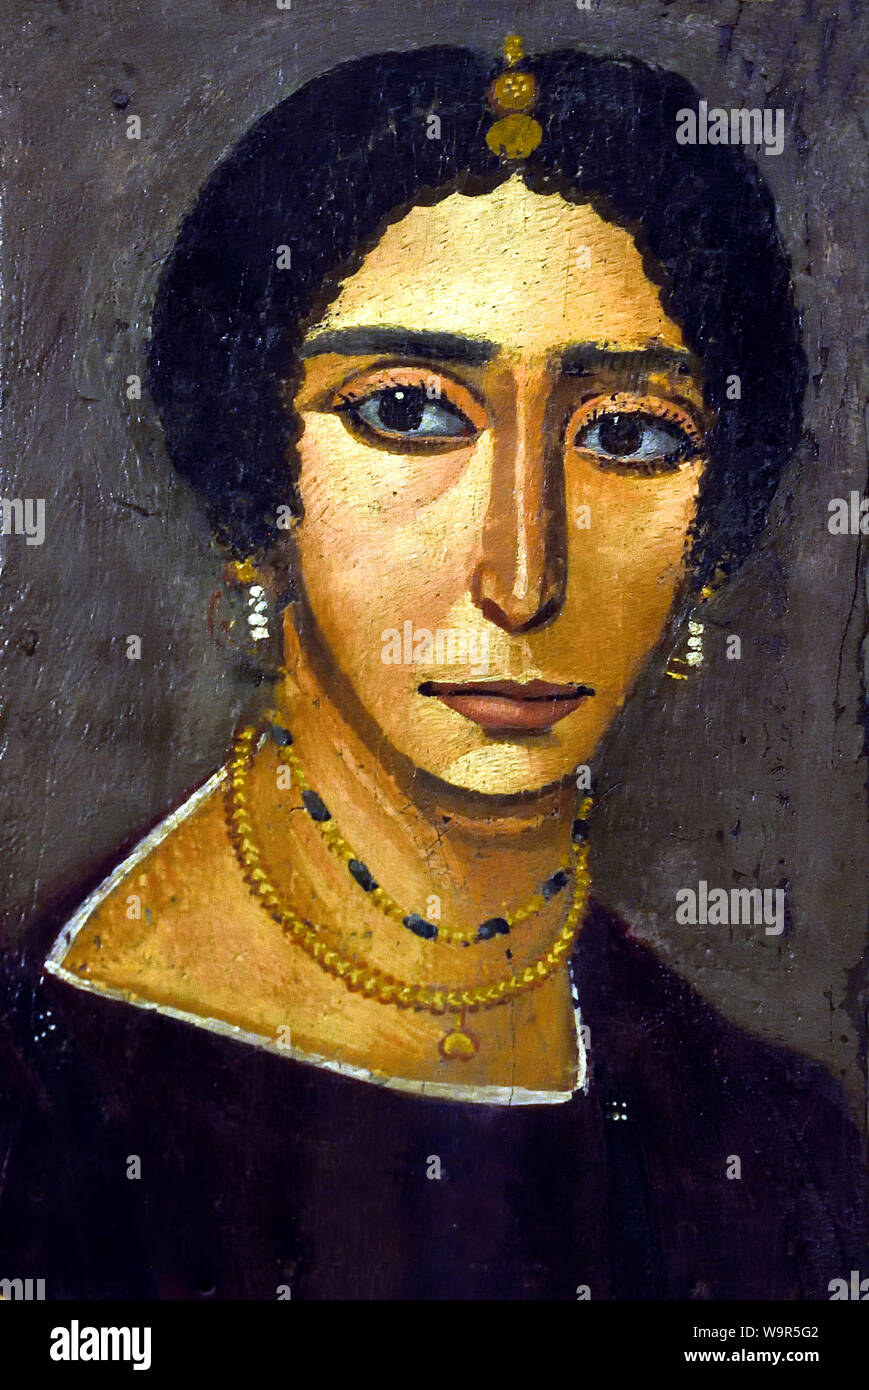 Philadelphia (El Rubaiyat, .,Egyptian. ( Naturalistic painted portrait on wooden boards attached to Upper class mummies from Roman Egypt. Mummy portraits have been found across Egypt, but are most common in the Fayum Basin ) Stock Photo